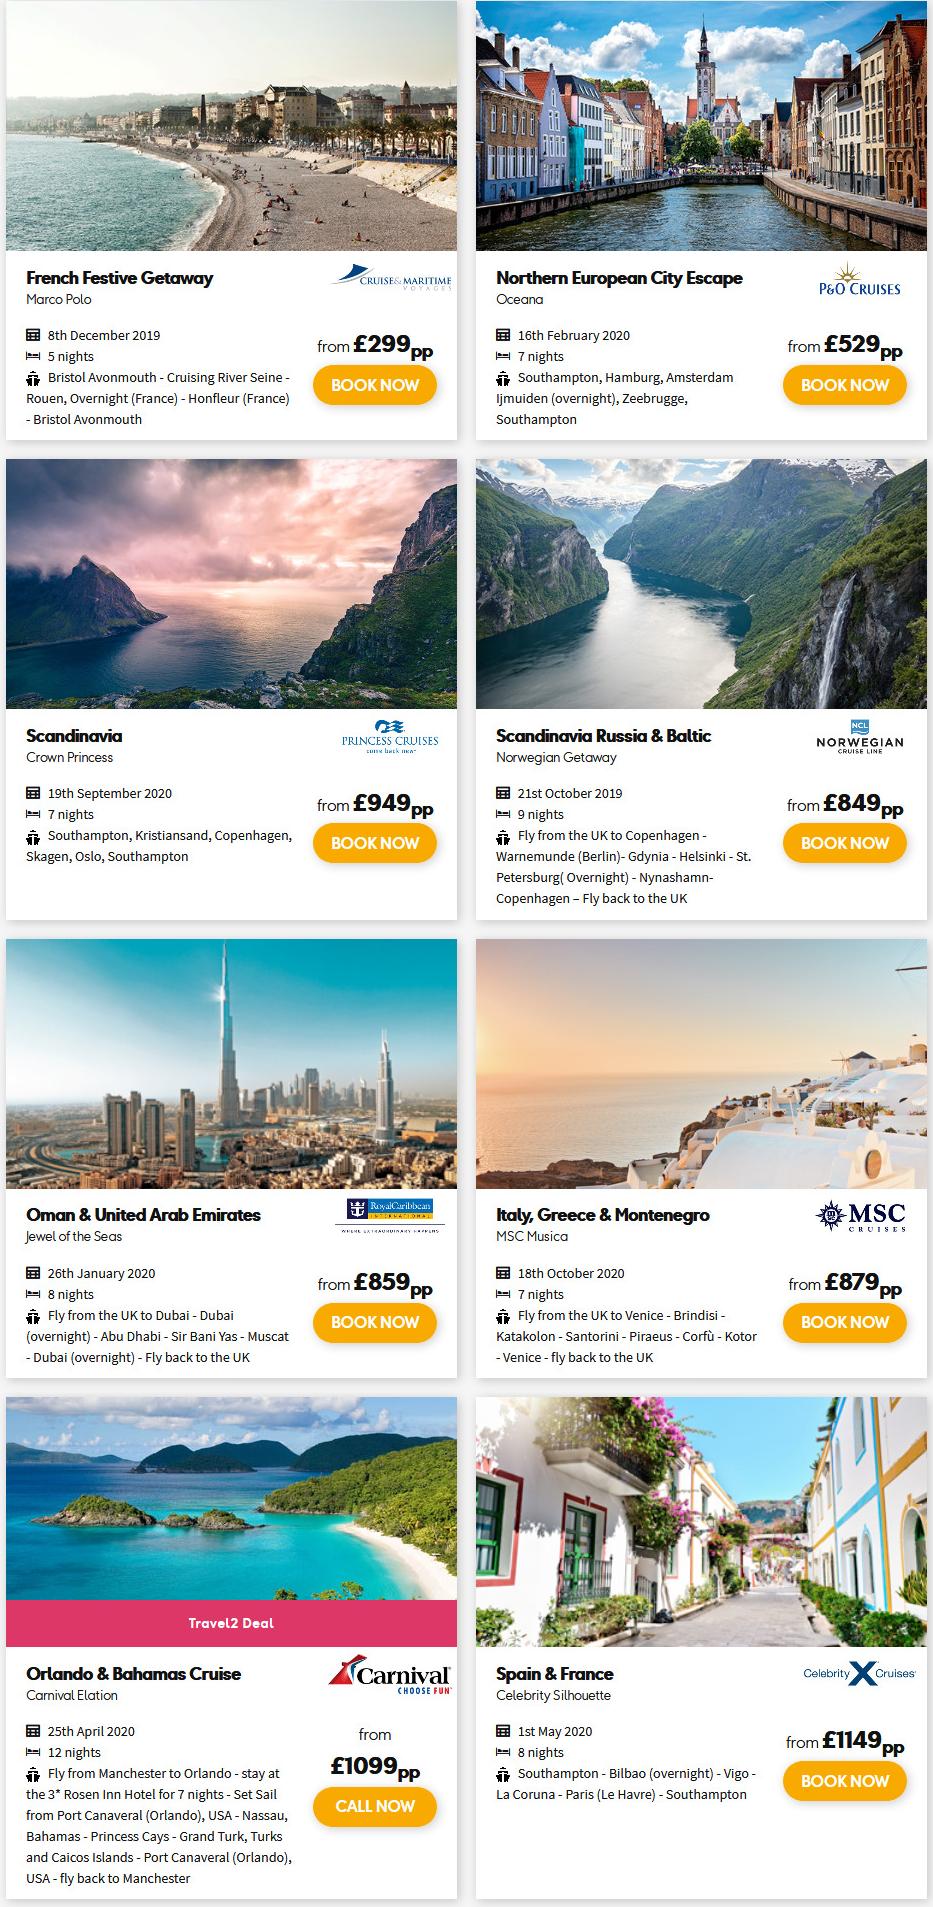 Thomas Cook: Cruise promotion deals 